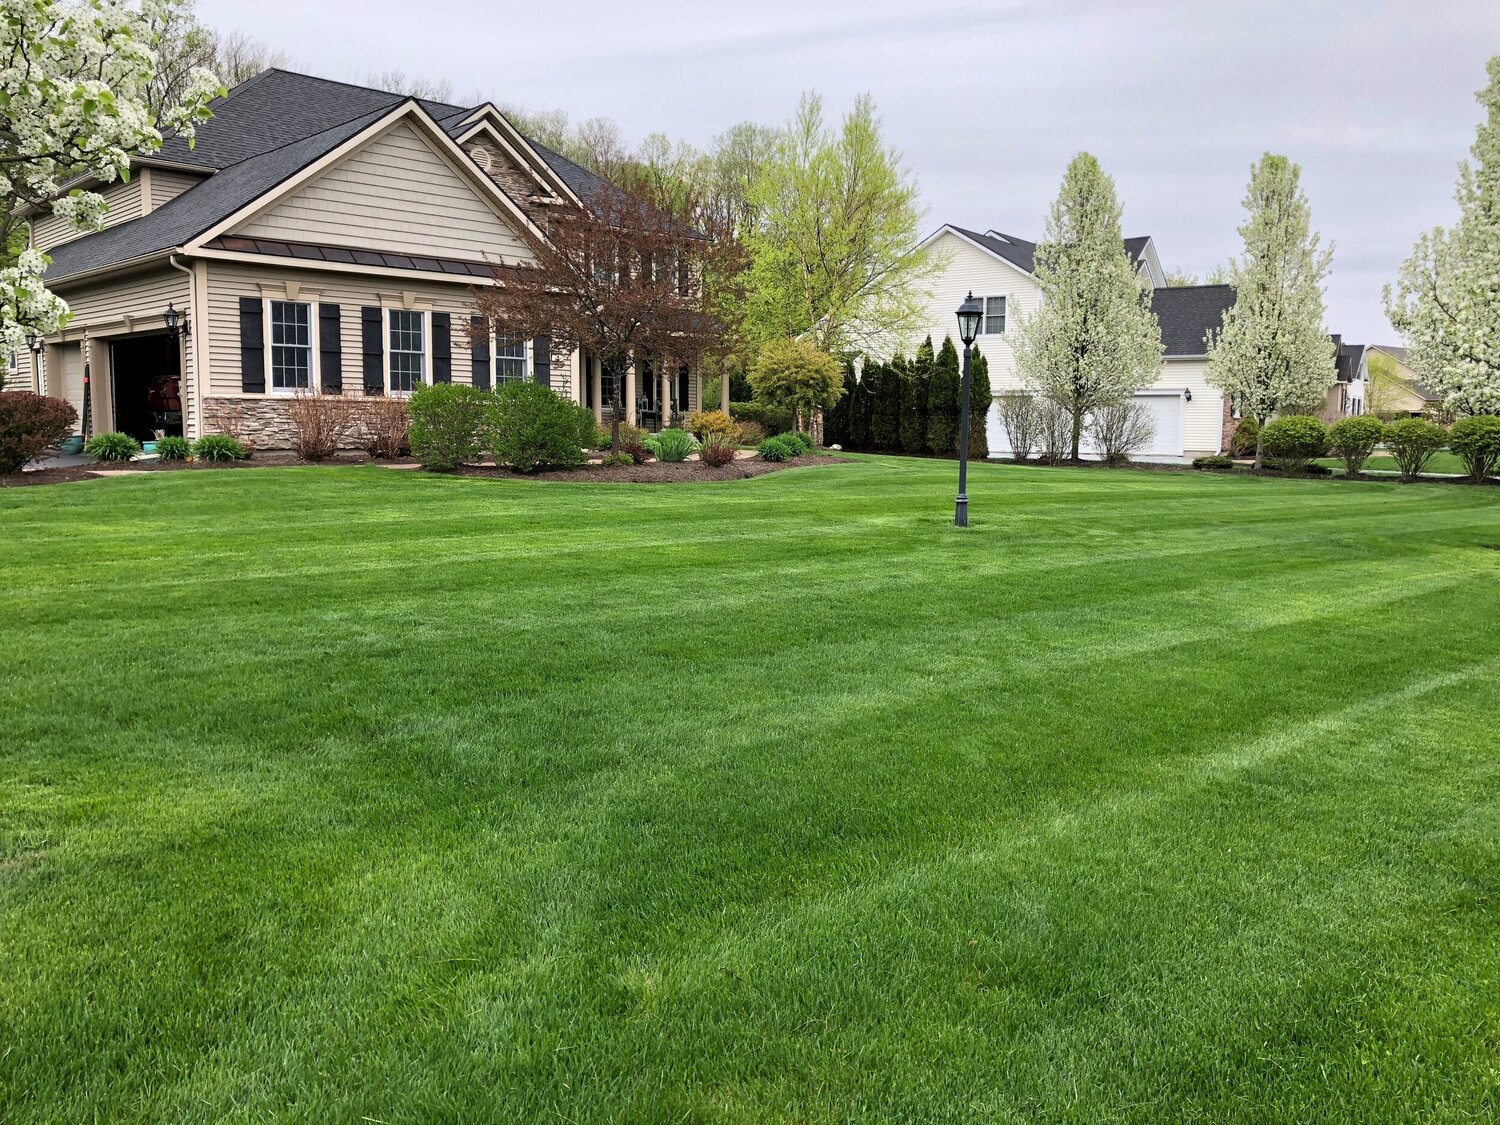 Landscaping Service Near Me - Kinnucan Tree Experts